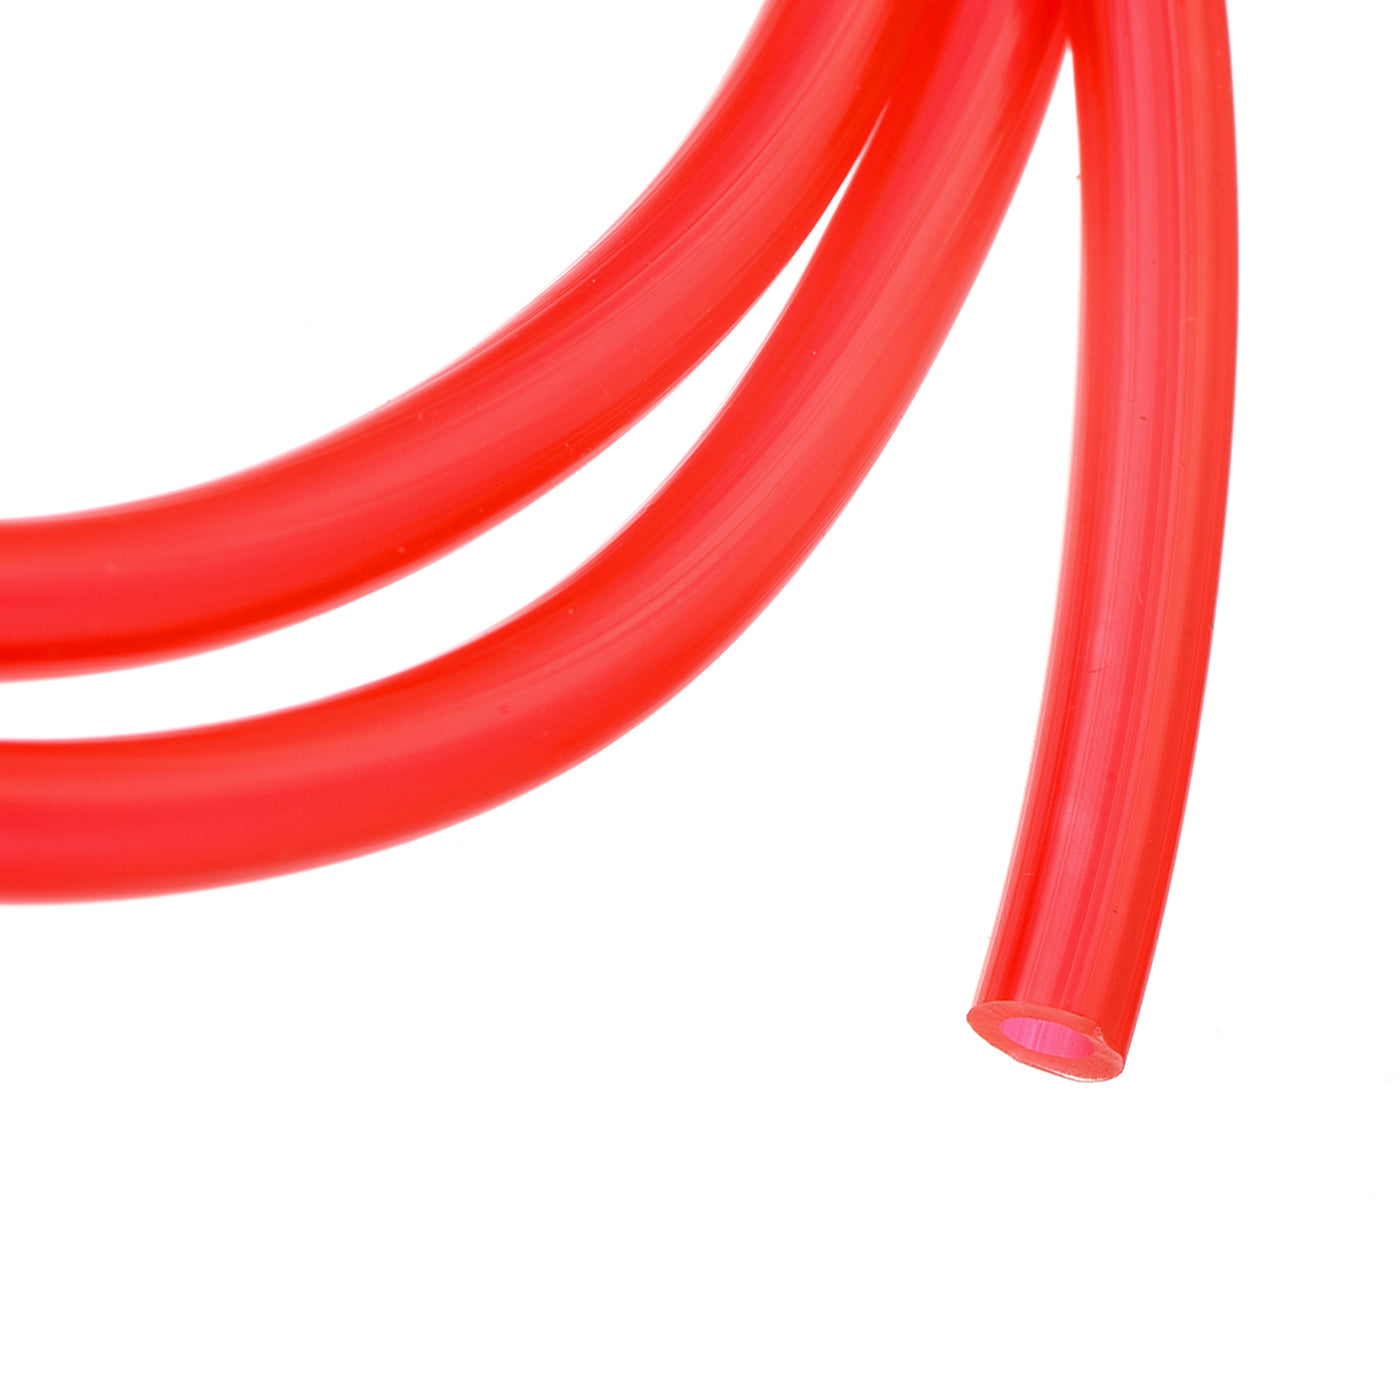 uxcell Uxcell Color Hose Tubing 1/8" ID, 13/64" OD Plastic 1Pcs 3.28 Ft for Pump Transfer, Red